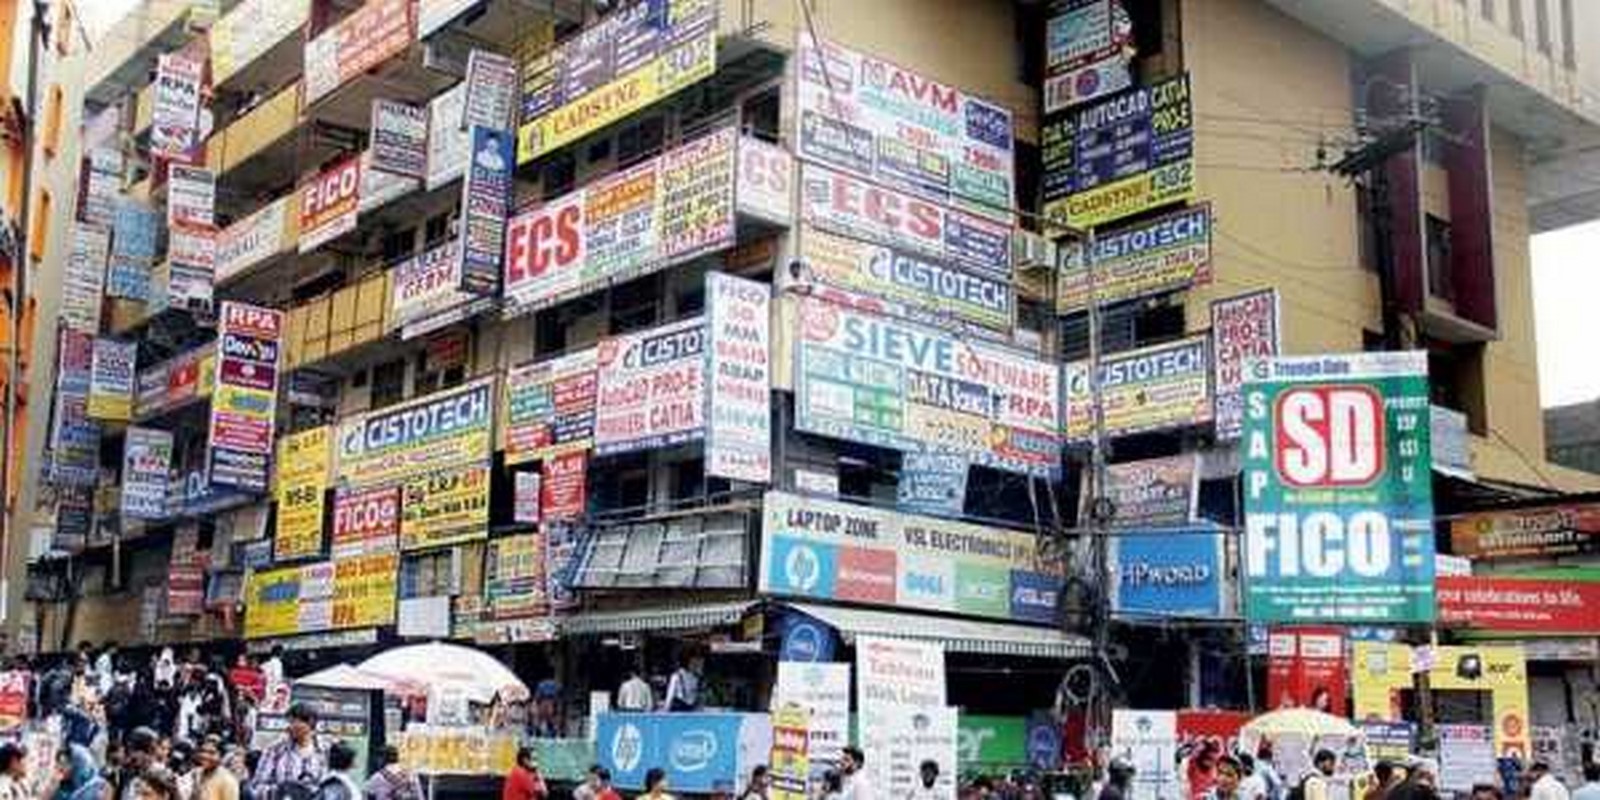 How do hoardings advertisements affect the architectural character of buildings - Sheet9